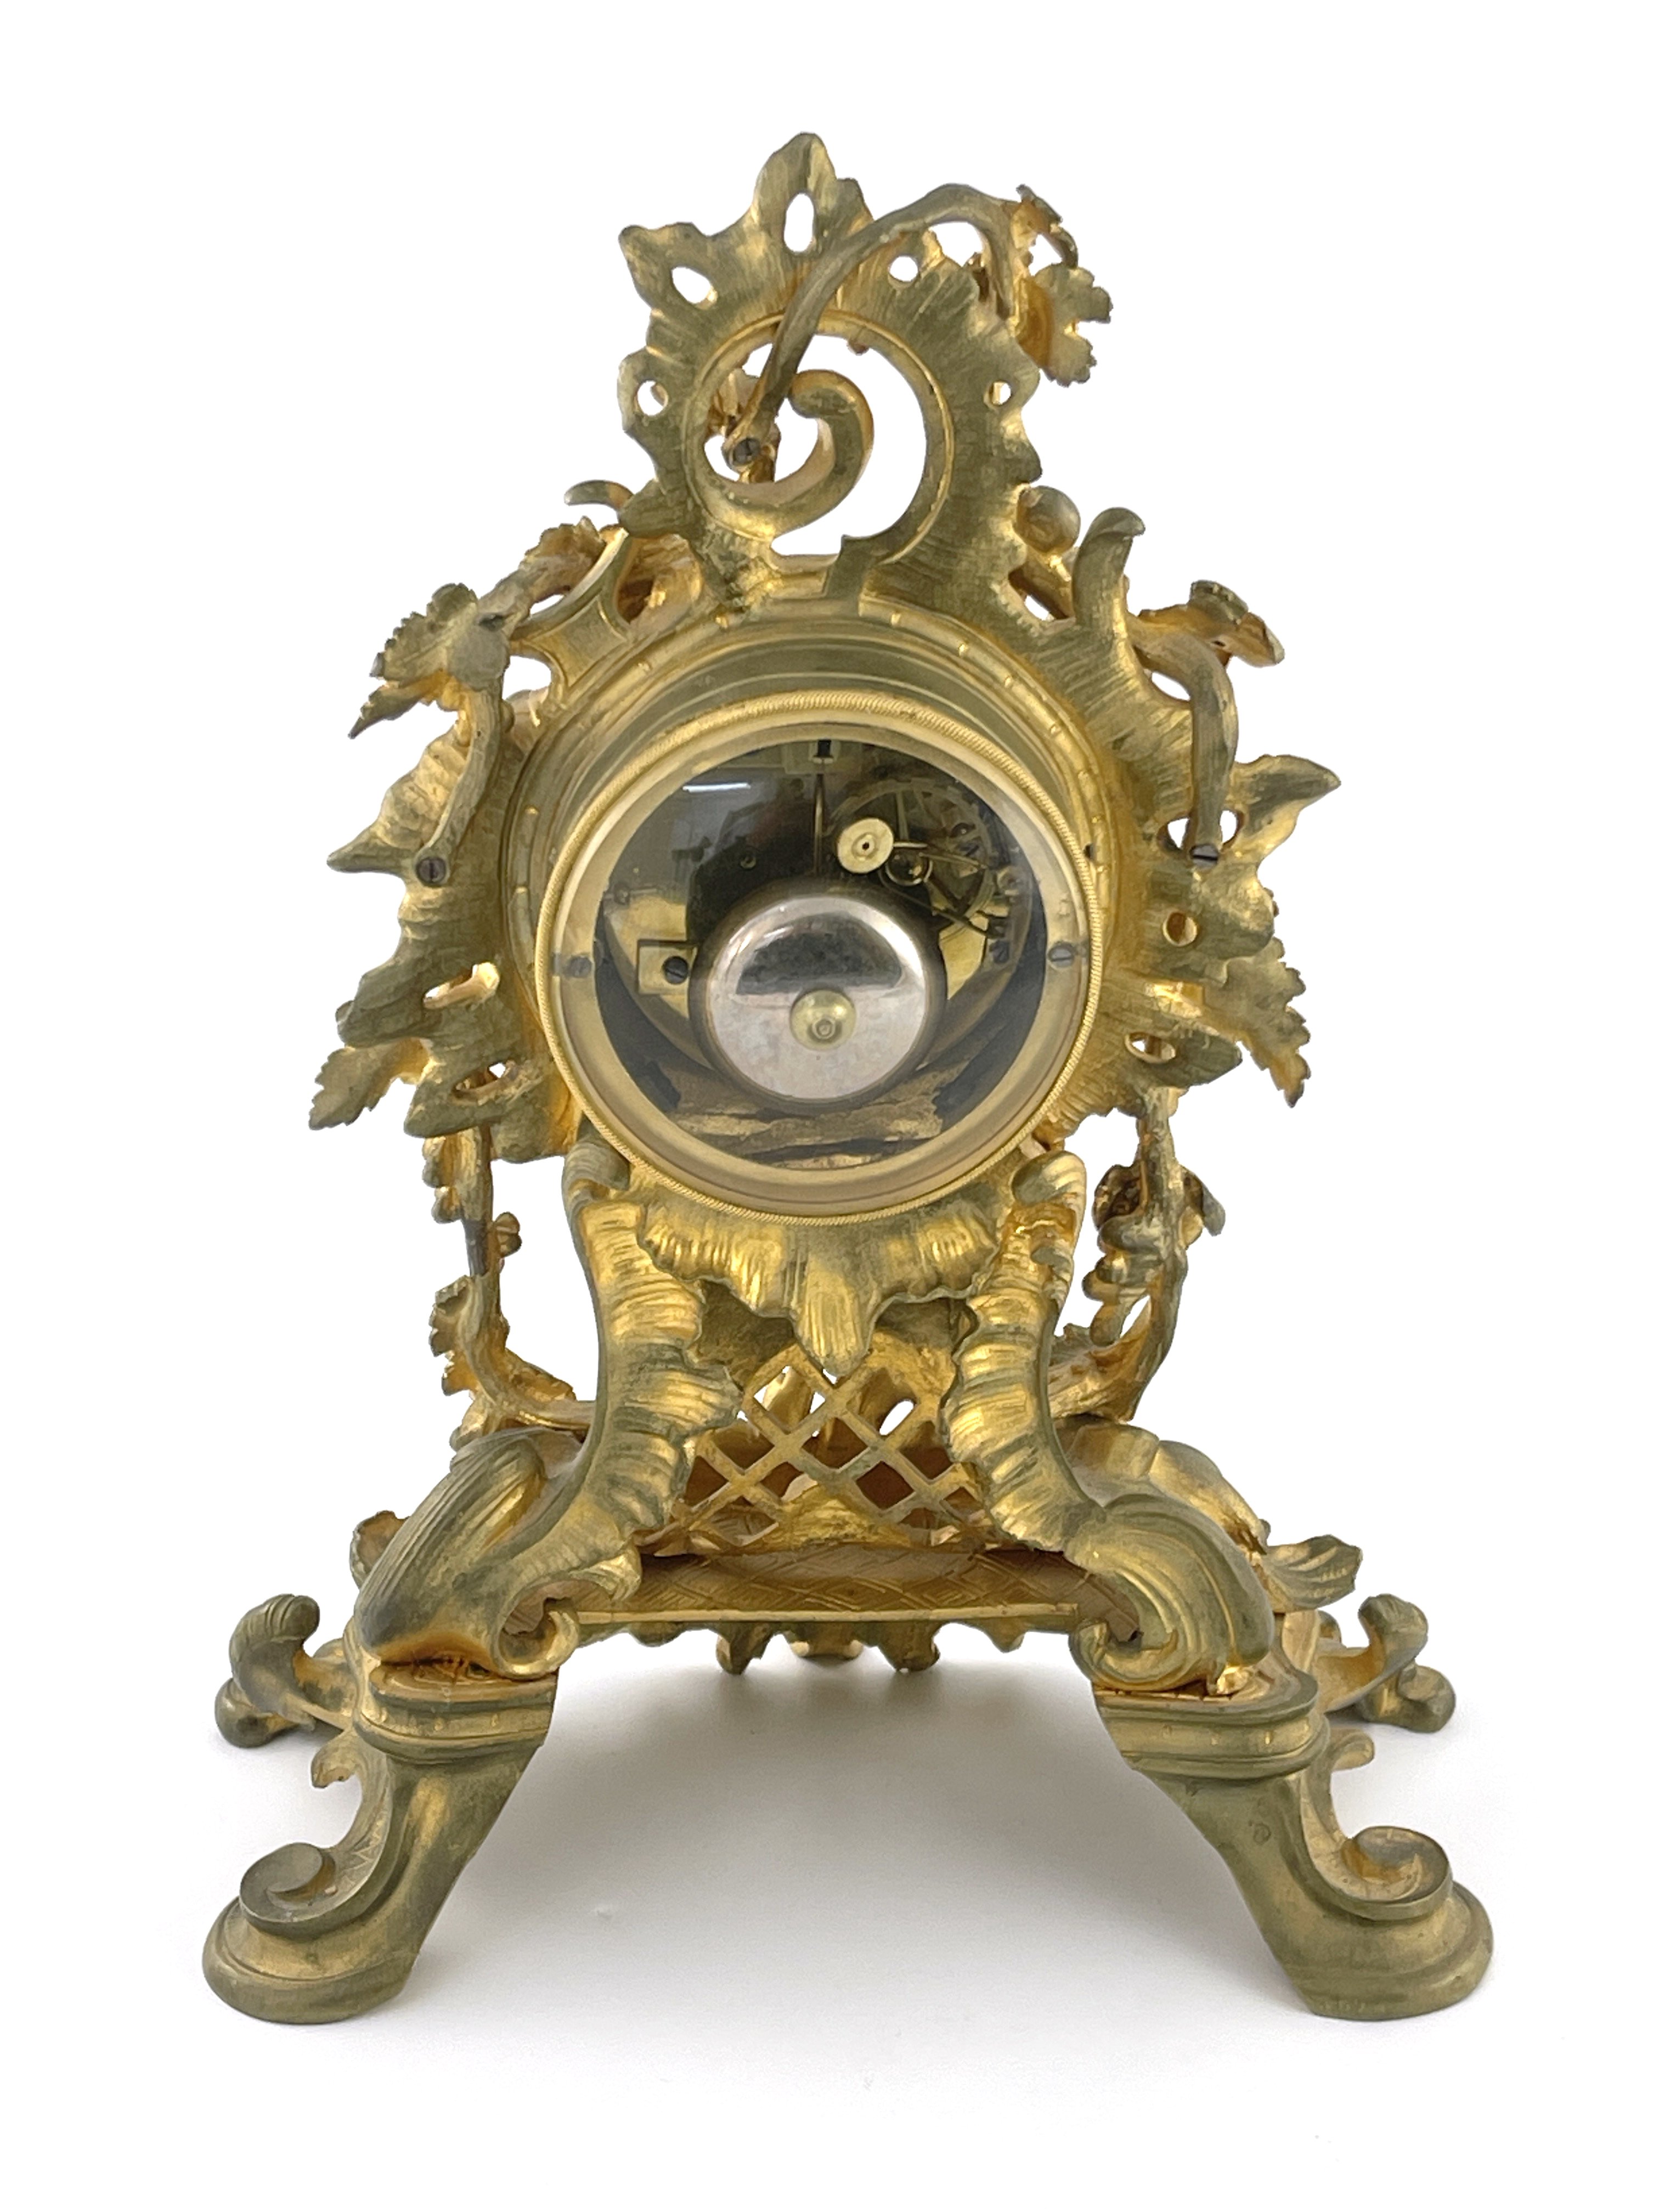 Raingo Freres, a mid 19th century French ormolu and gilt brass mantel clock, relief moulded Rococo - Image 3 of 4